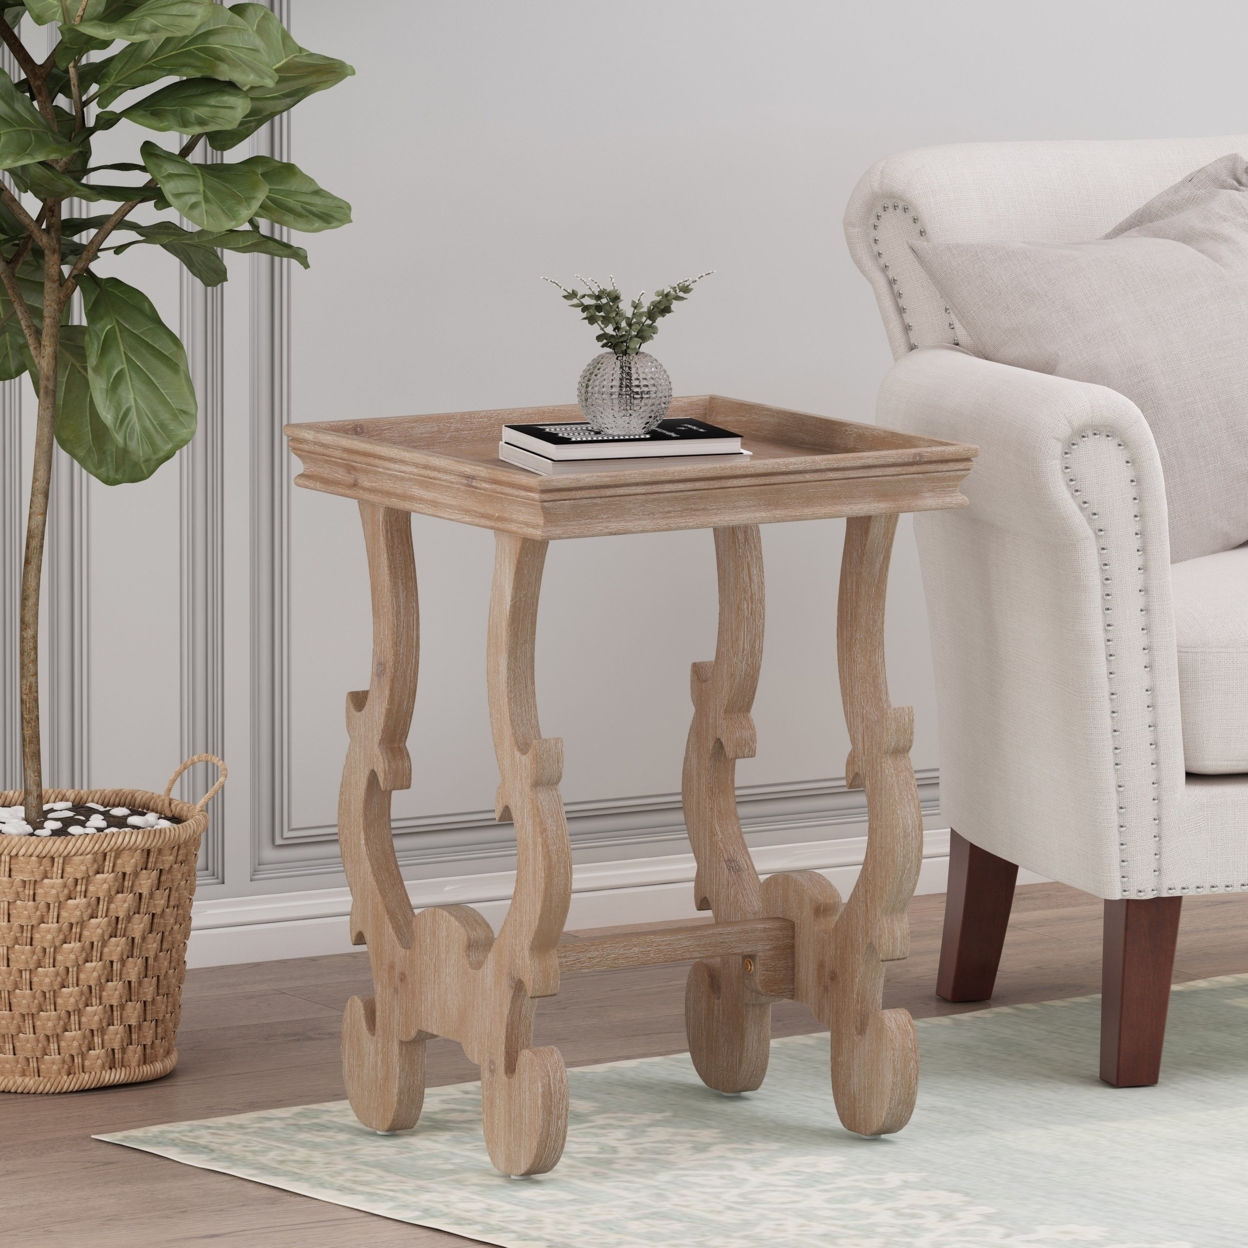 Joplin French Country Accent Table With Square Top - Natural